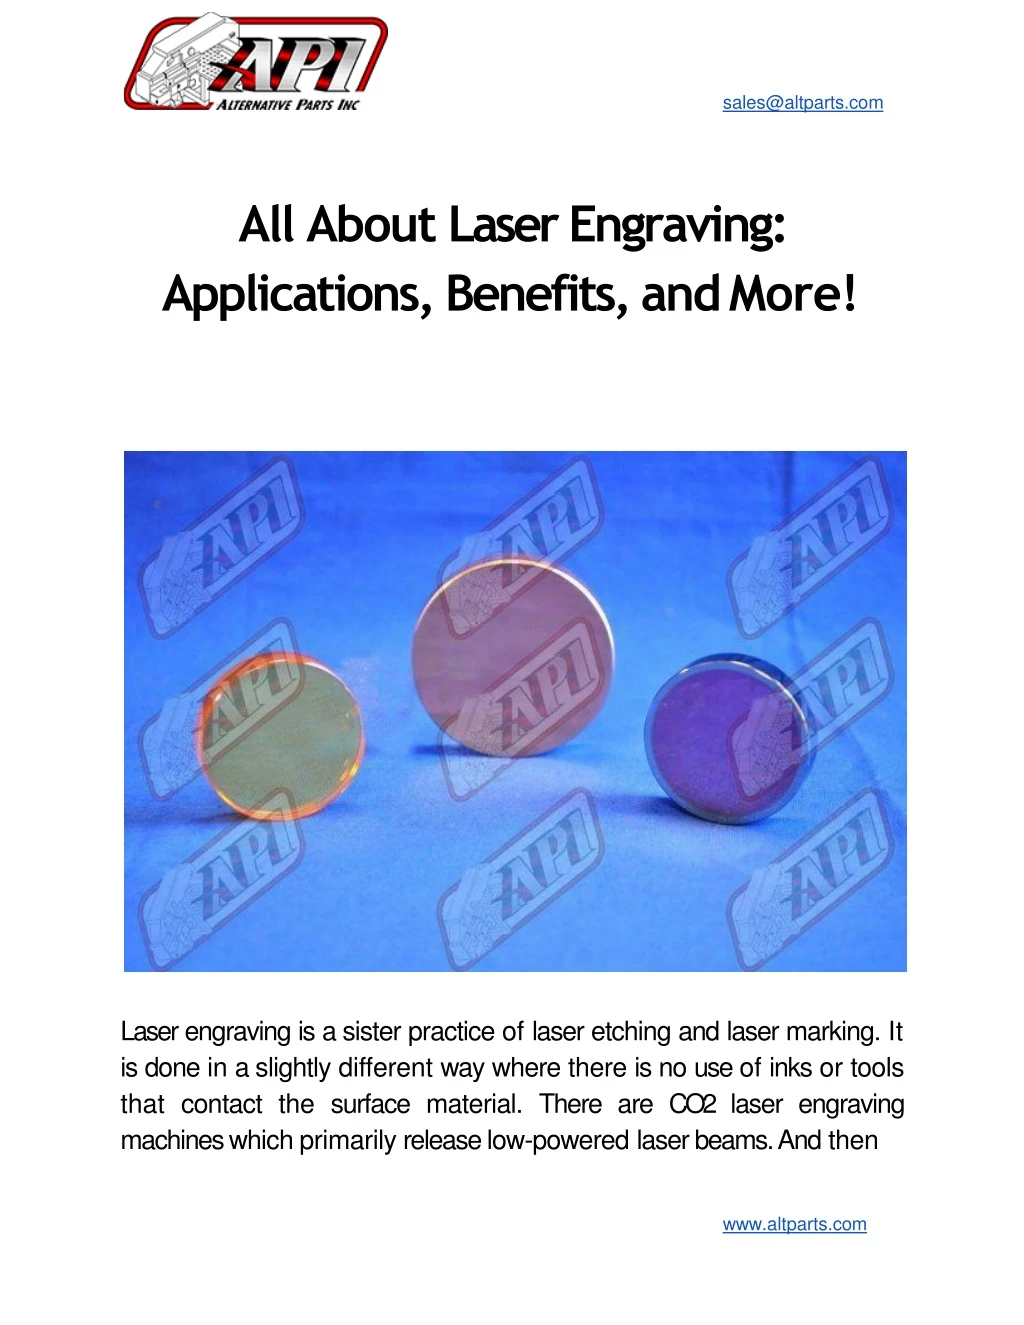 all about laser engraving applications benefits and more